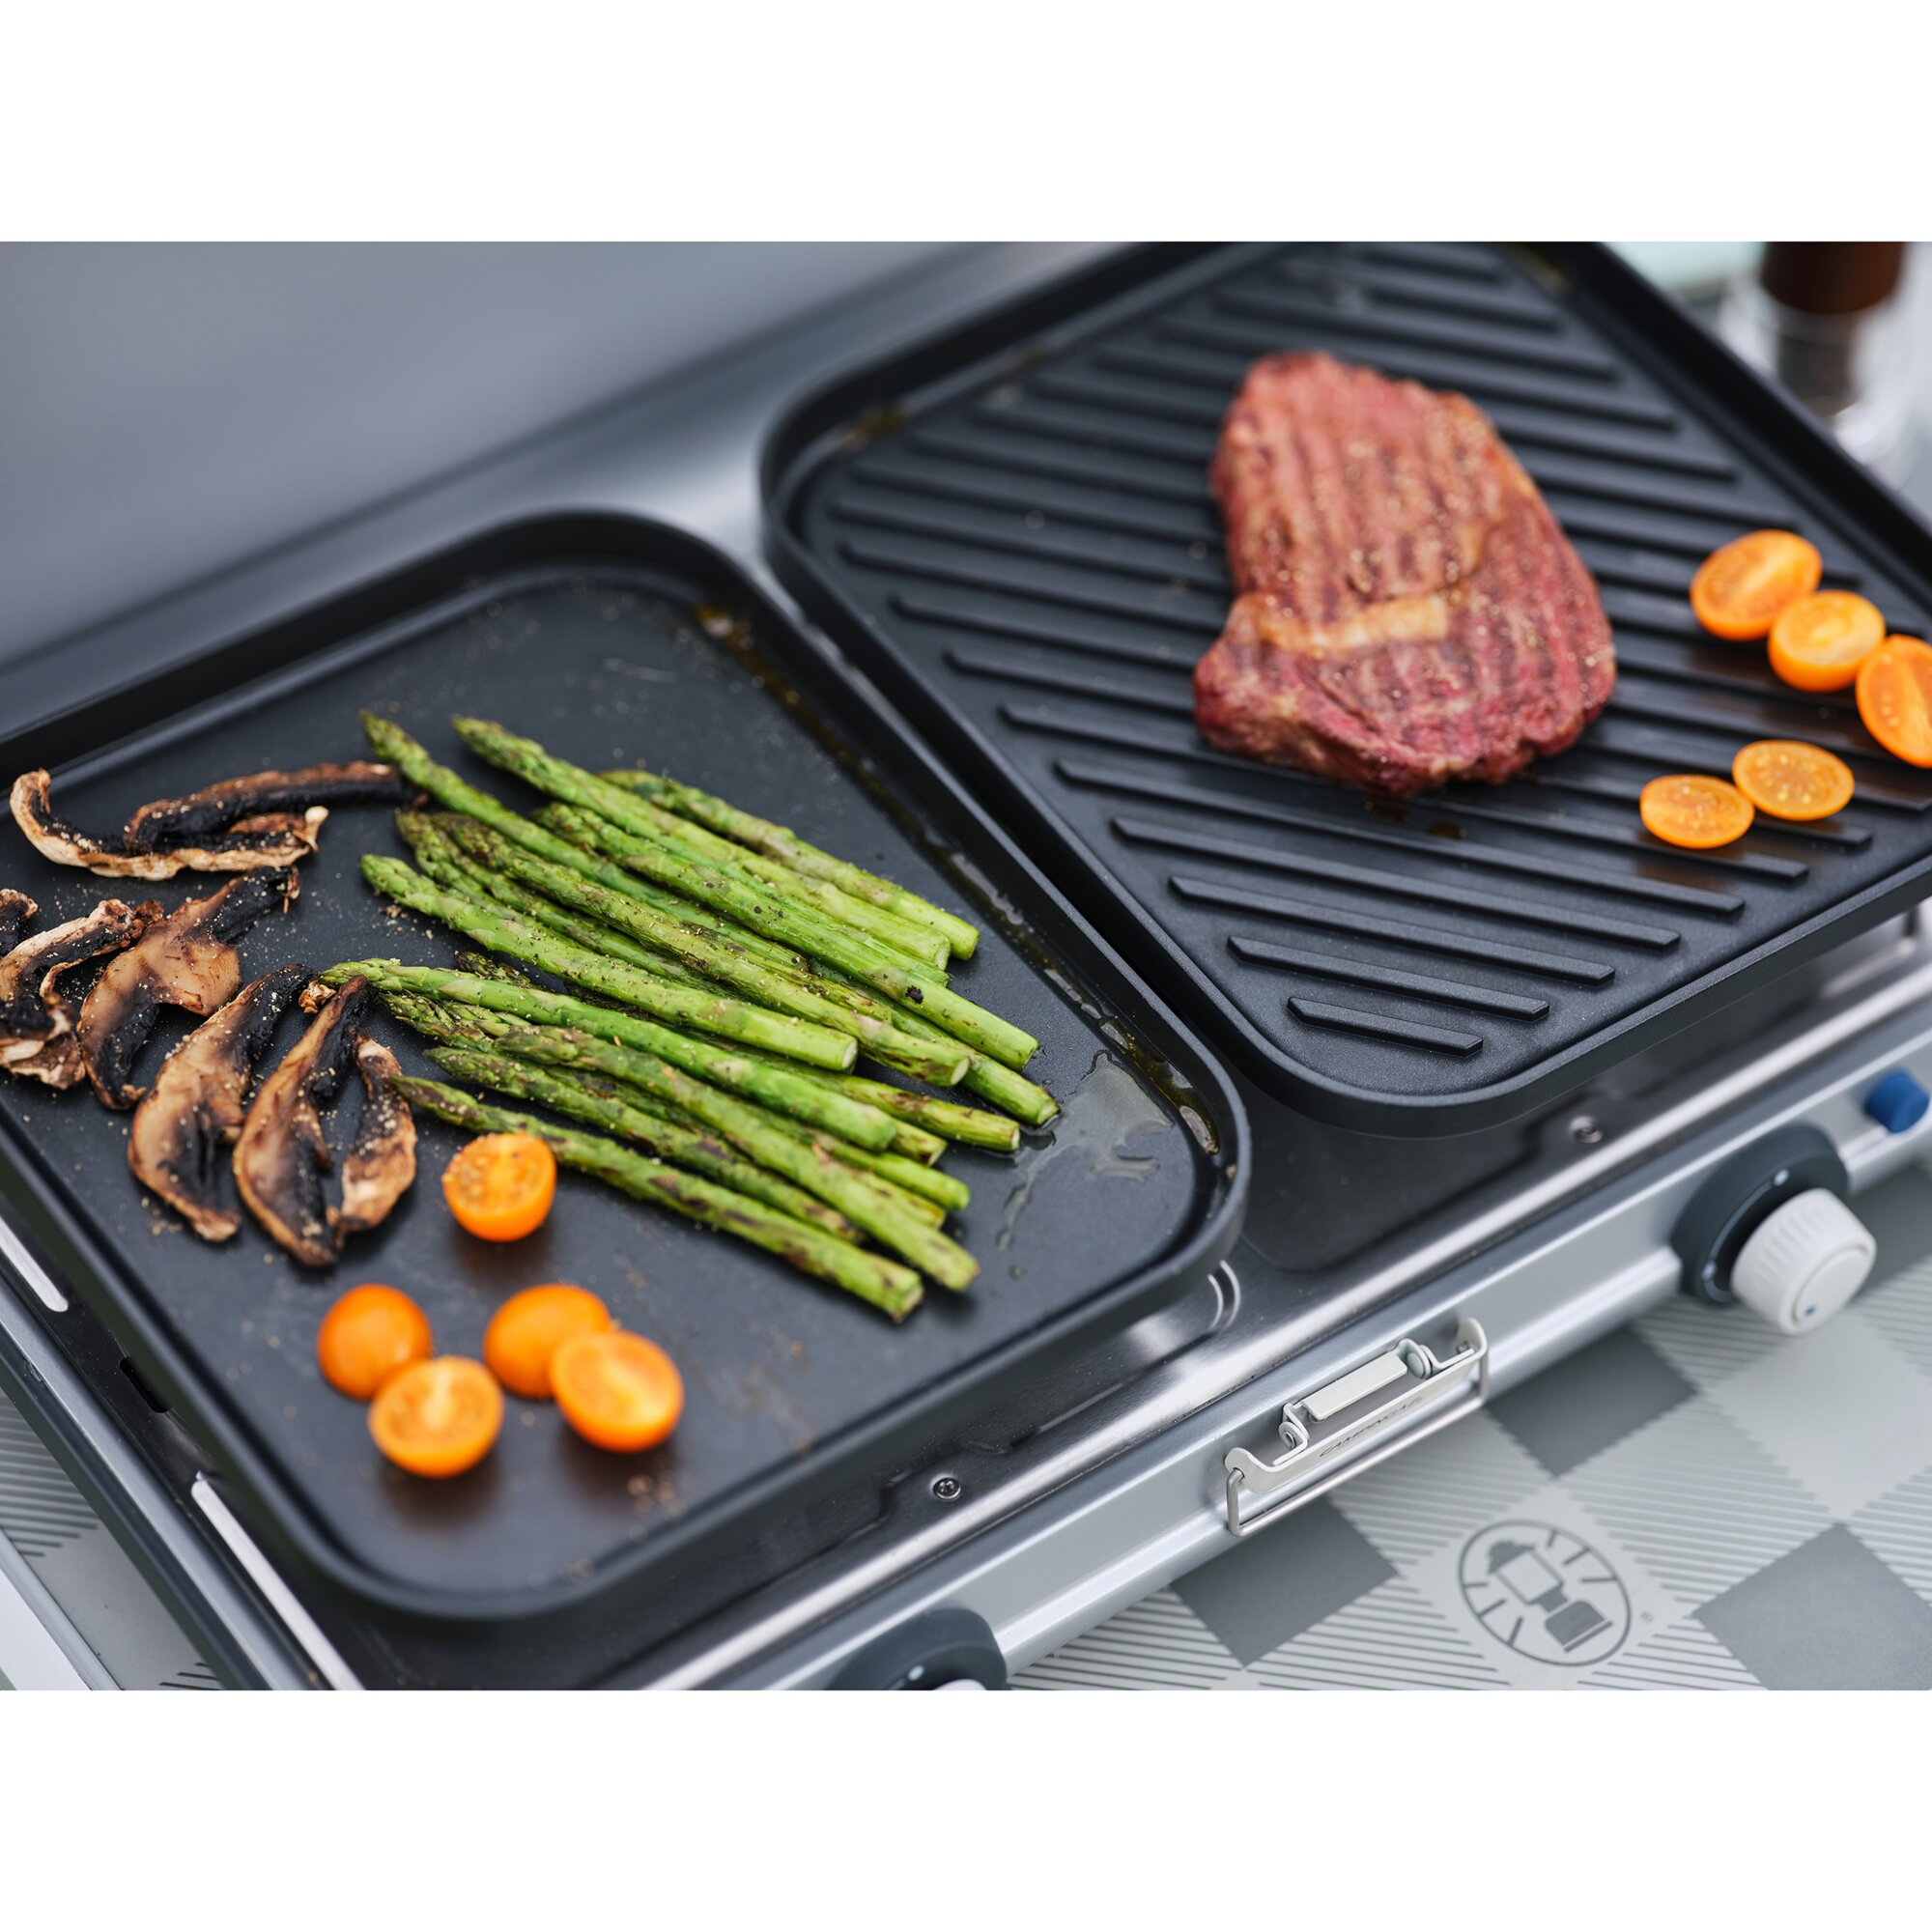 Camping Kitchen™ 2 Grill & Go Campingaz